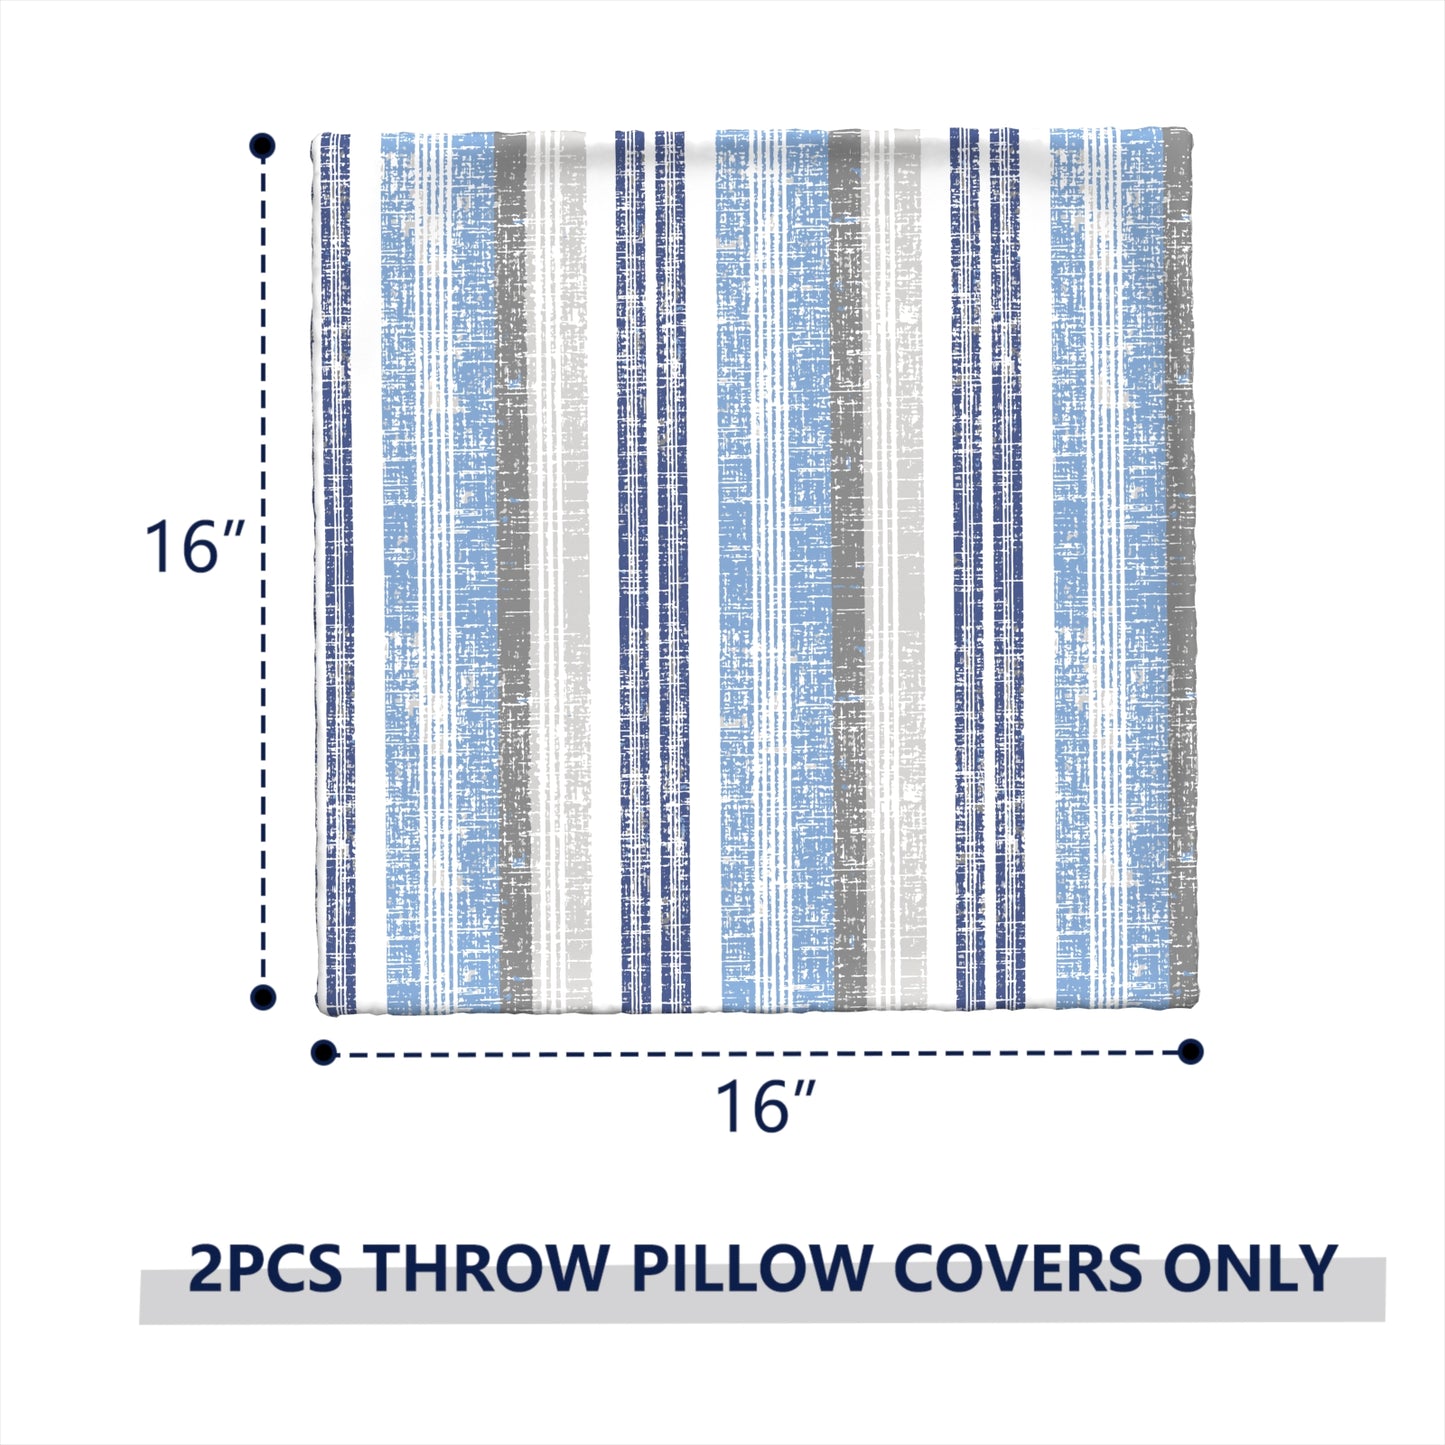 Melody Elephant Outdoor/Indoor Throw Pillow Covers Set of 2, All Weather Square Pillow Cases 16x16 Inch, Patio Cushion Pillow of Home Furniture Use, Stripe Layered Blue